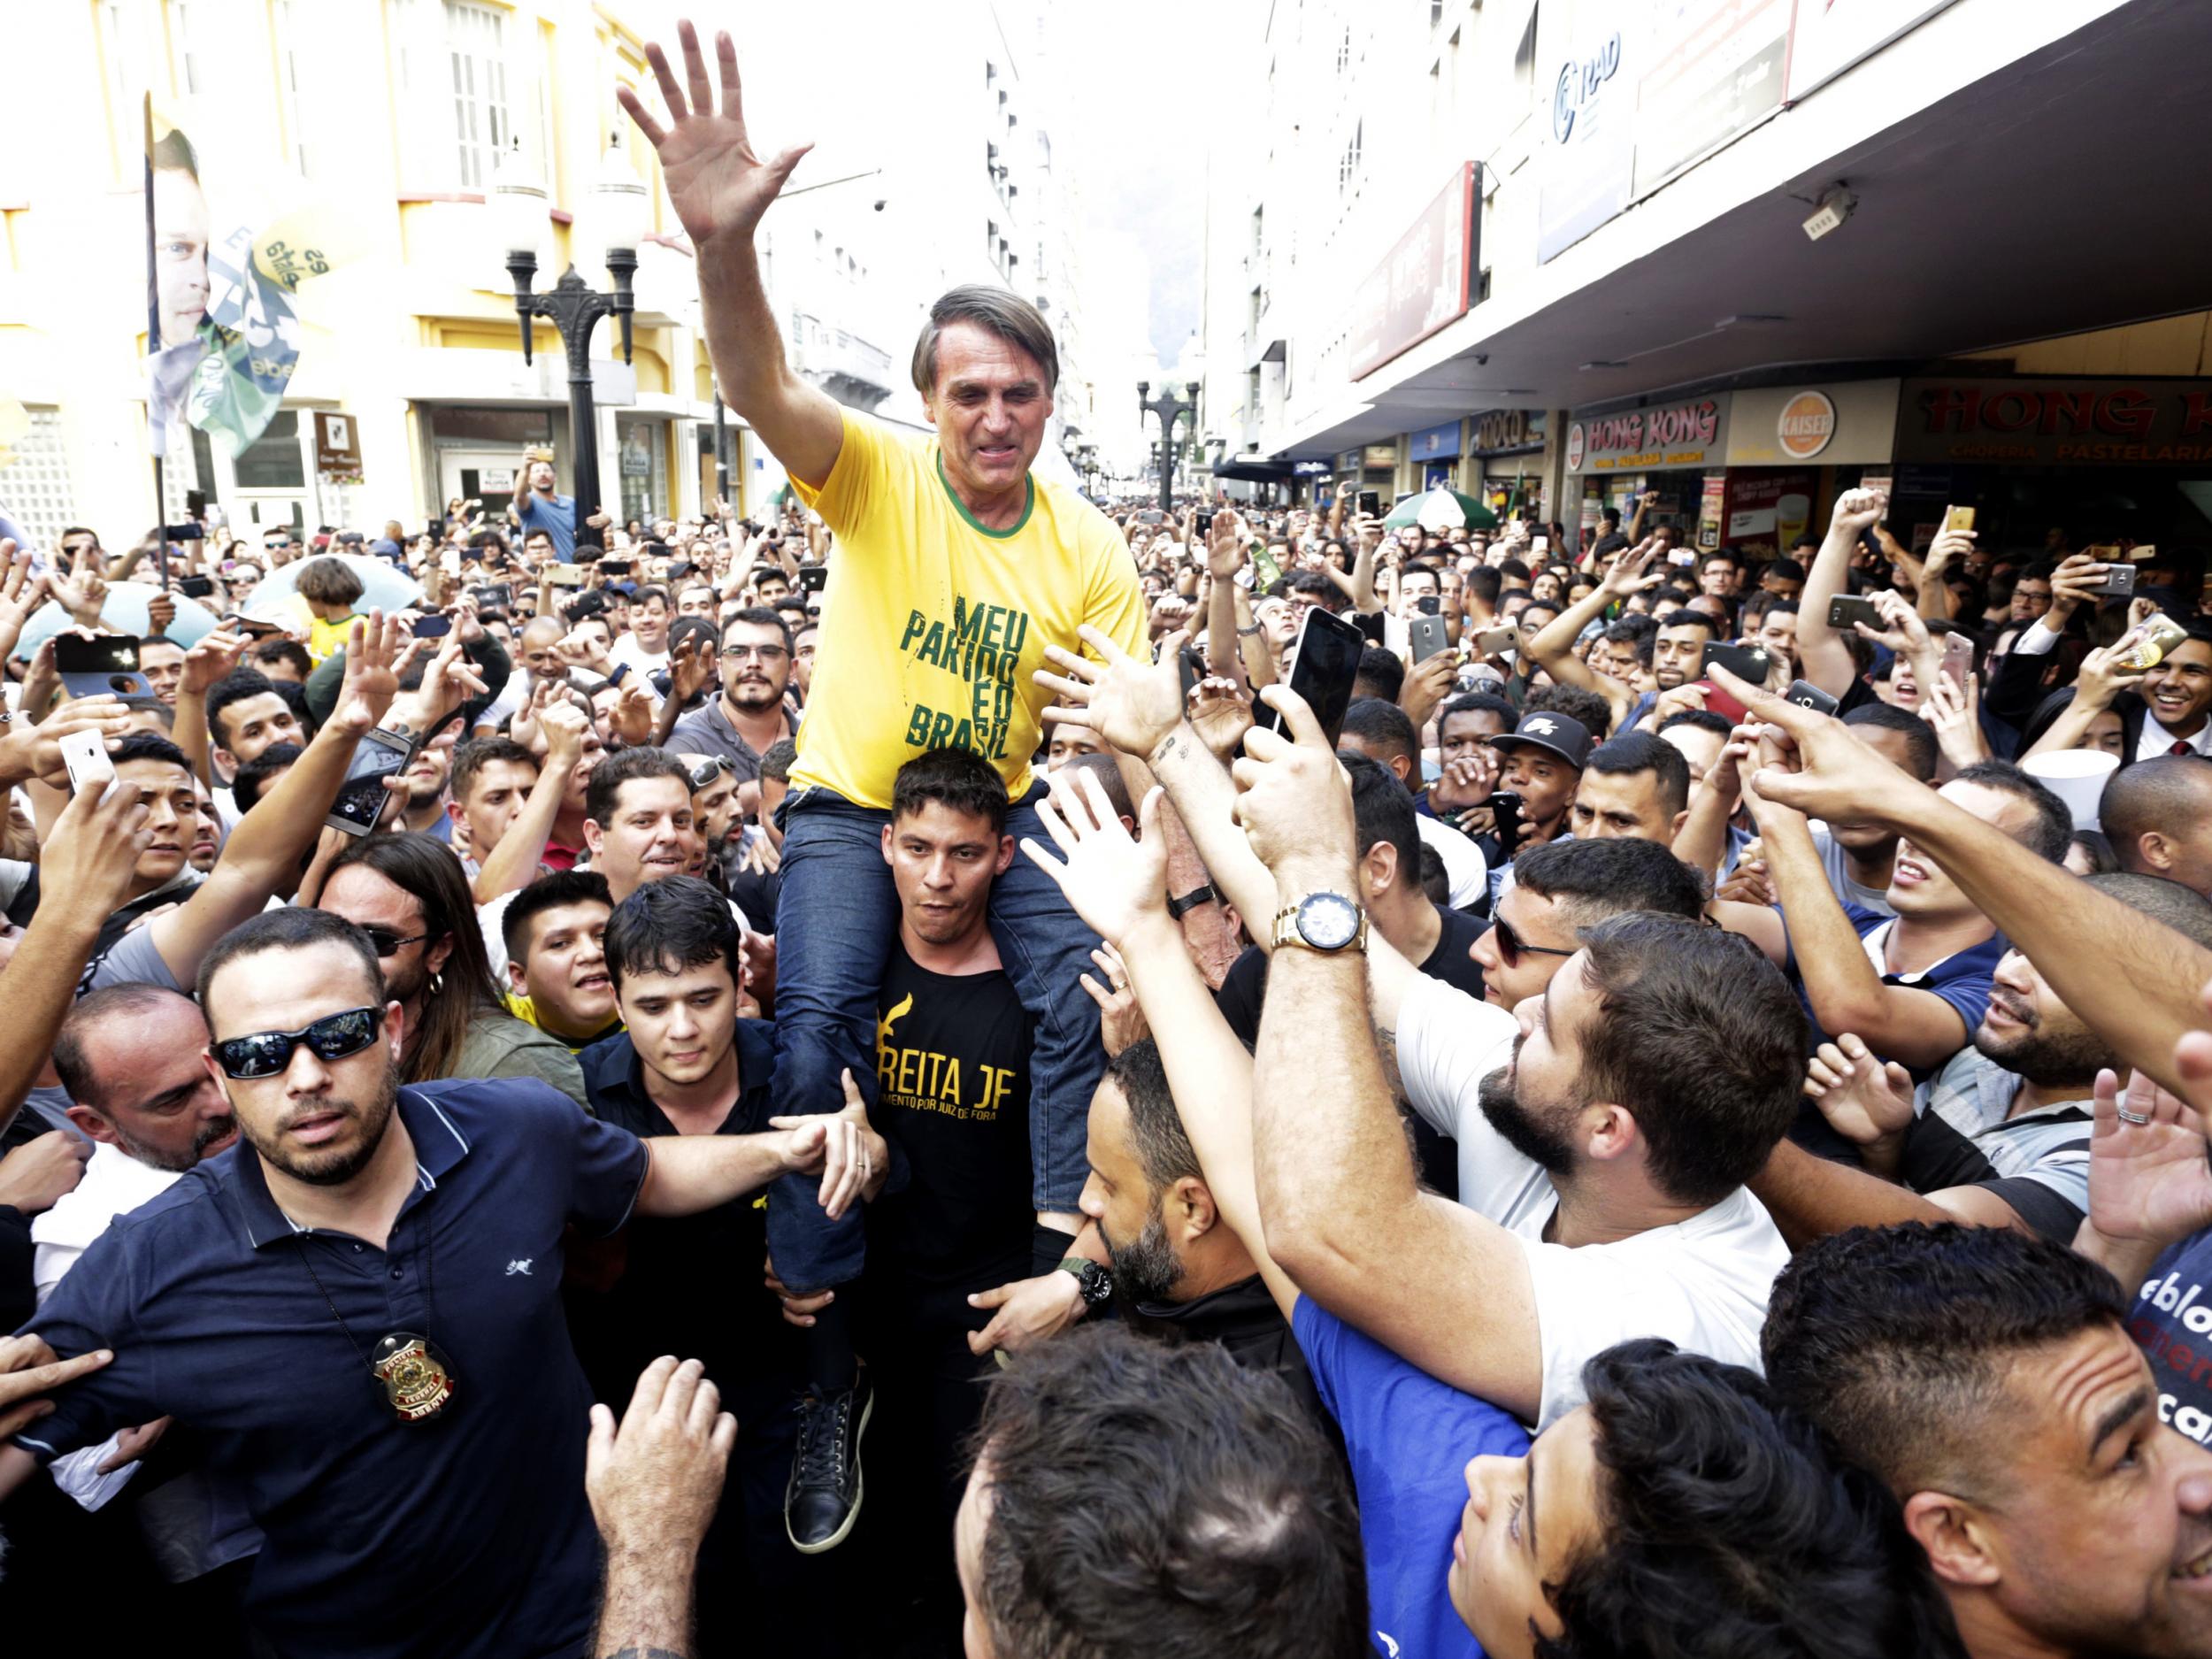 Presidential candidate Jair Bolsonaro is taken on the shoulders of a supporter moments before being stabbed during a campaign rally